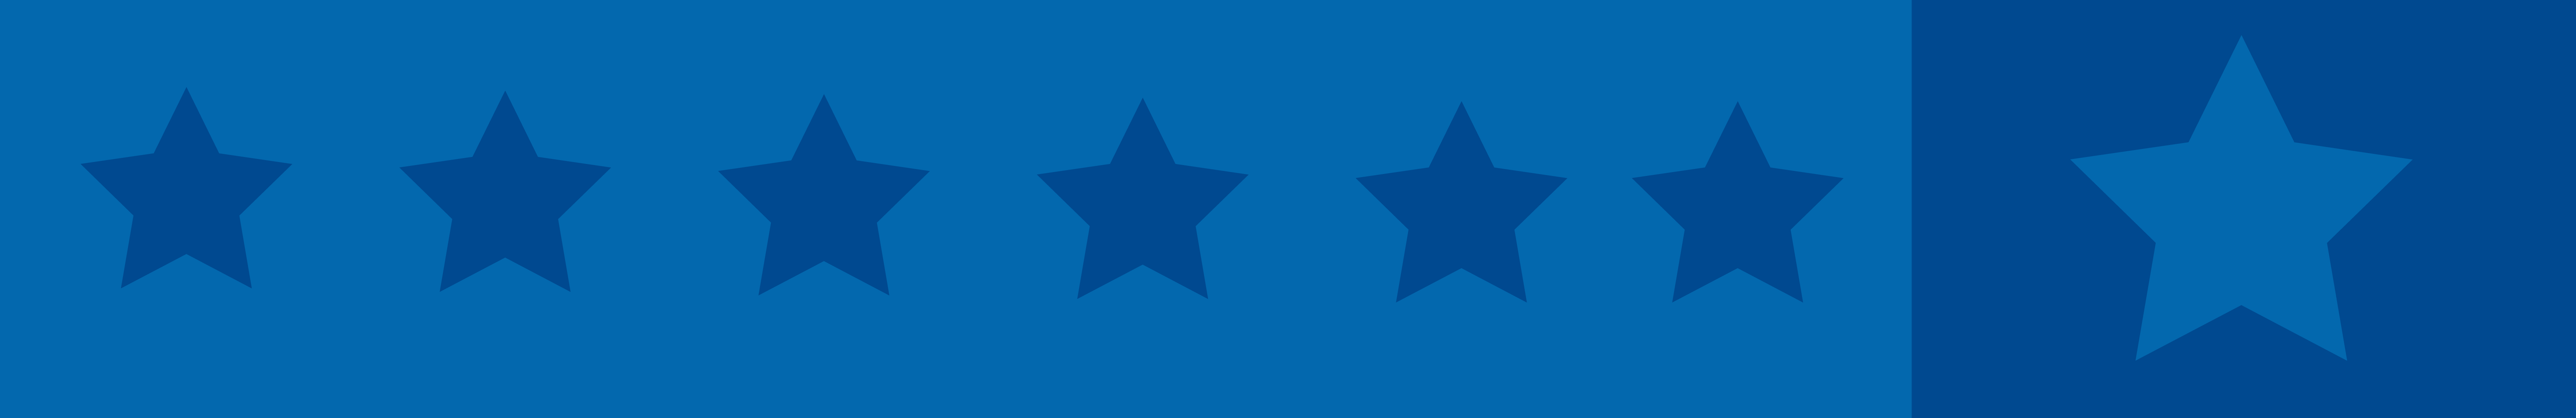 divider - blue banner with stars across